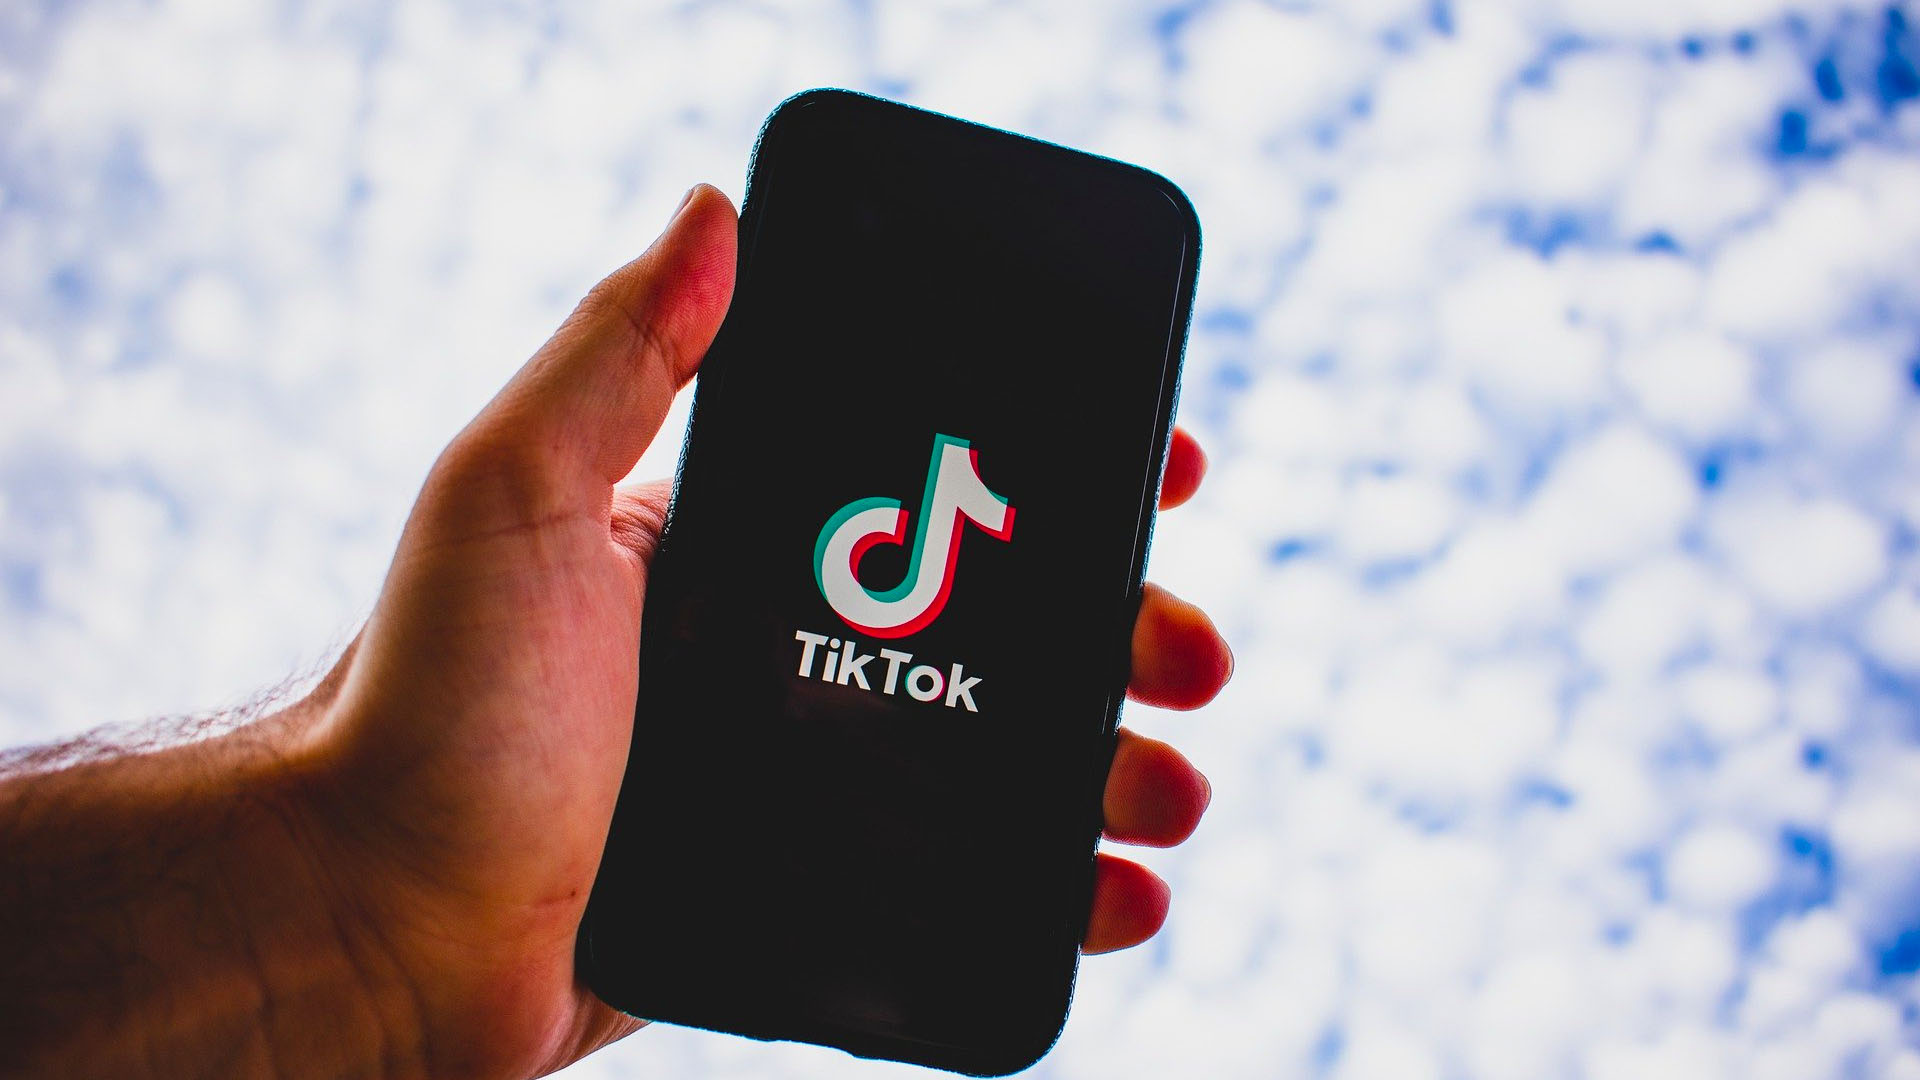 TikTok sued for excessive and sinister children data collection worth billions